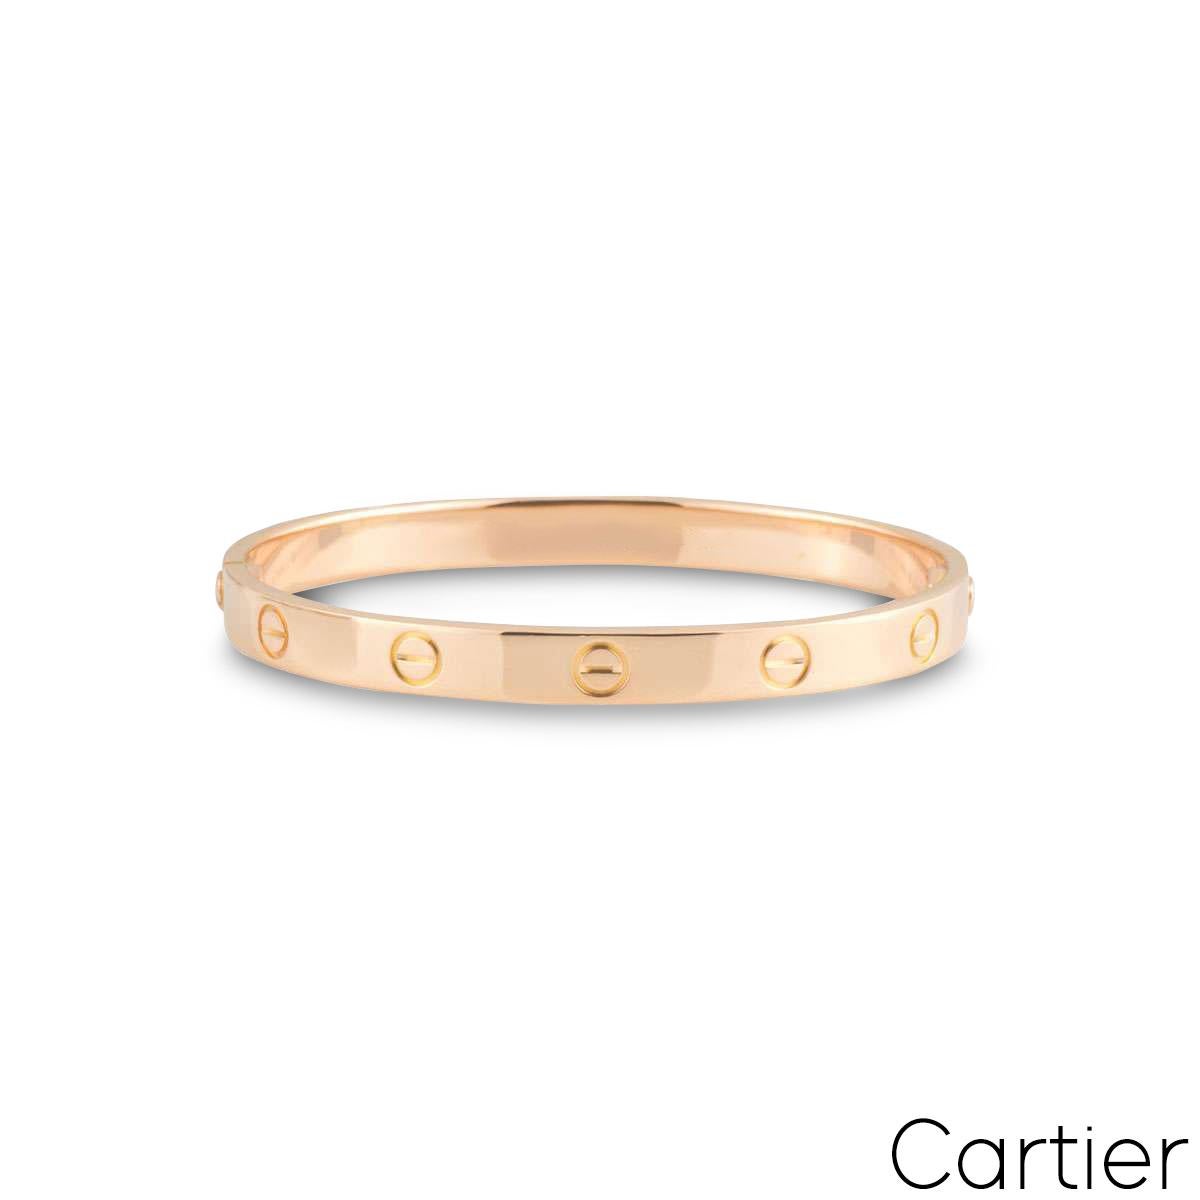 An iconic 18k rose gold Cartier bracelet from the Love collection. The bracelet comprises of the iconic screw motifs around the outer edge. The bracelet is a size 17 and features the new style screw system with a gross weight of 29.4 grams.

The